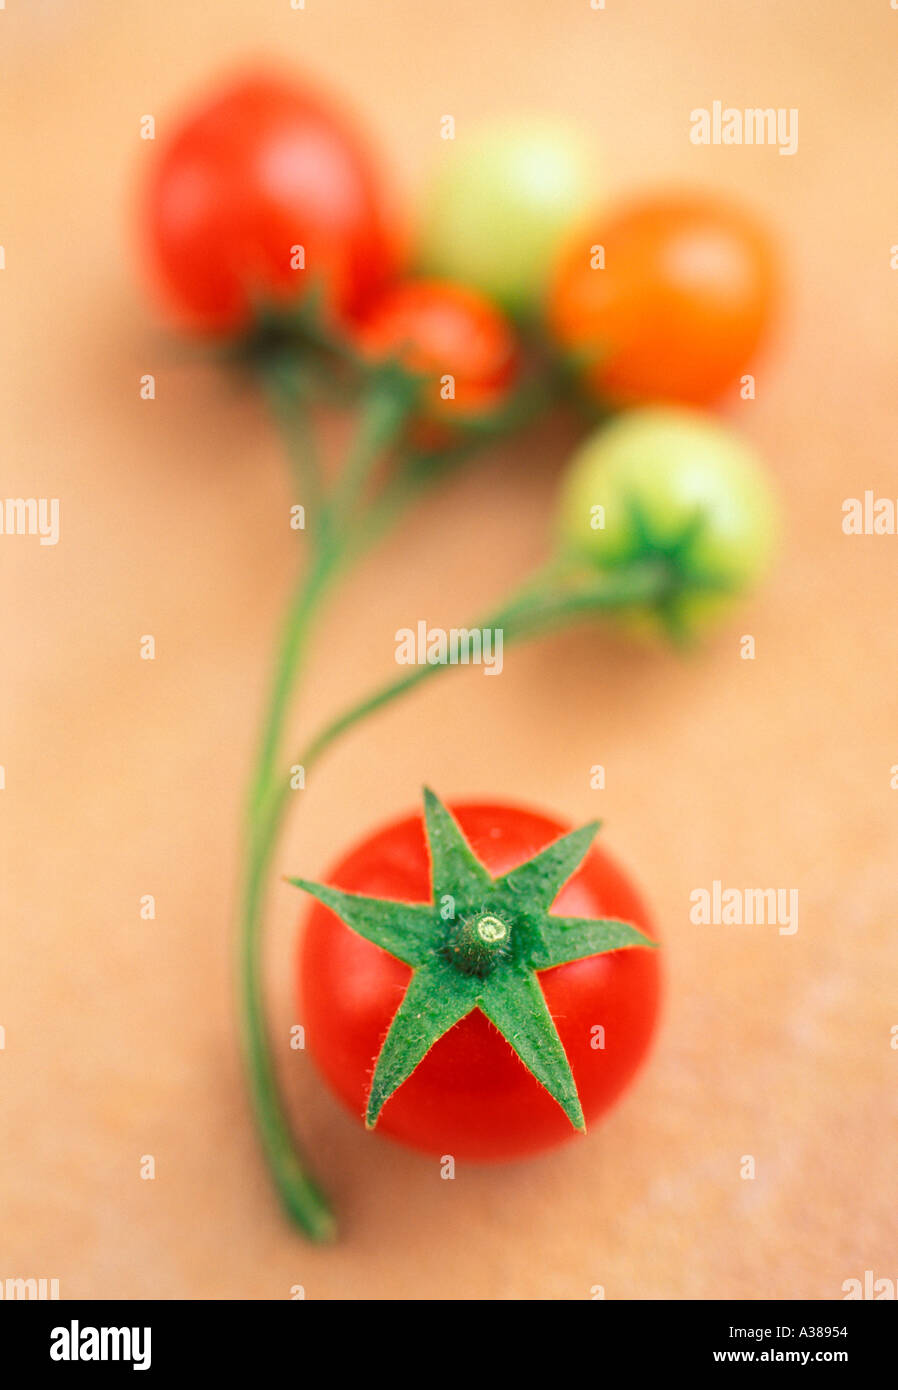 Cherry tomatoes ripe and unripe on stem Stock Photo